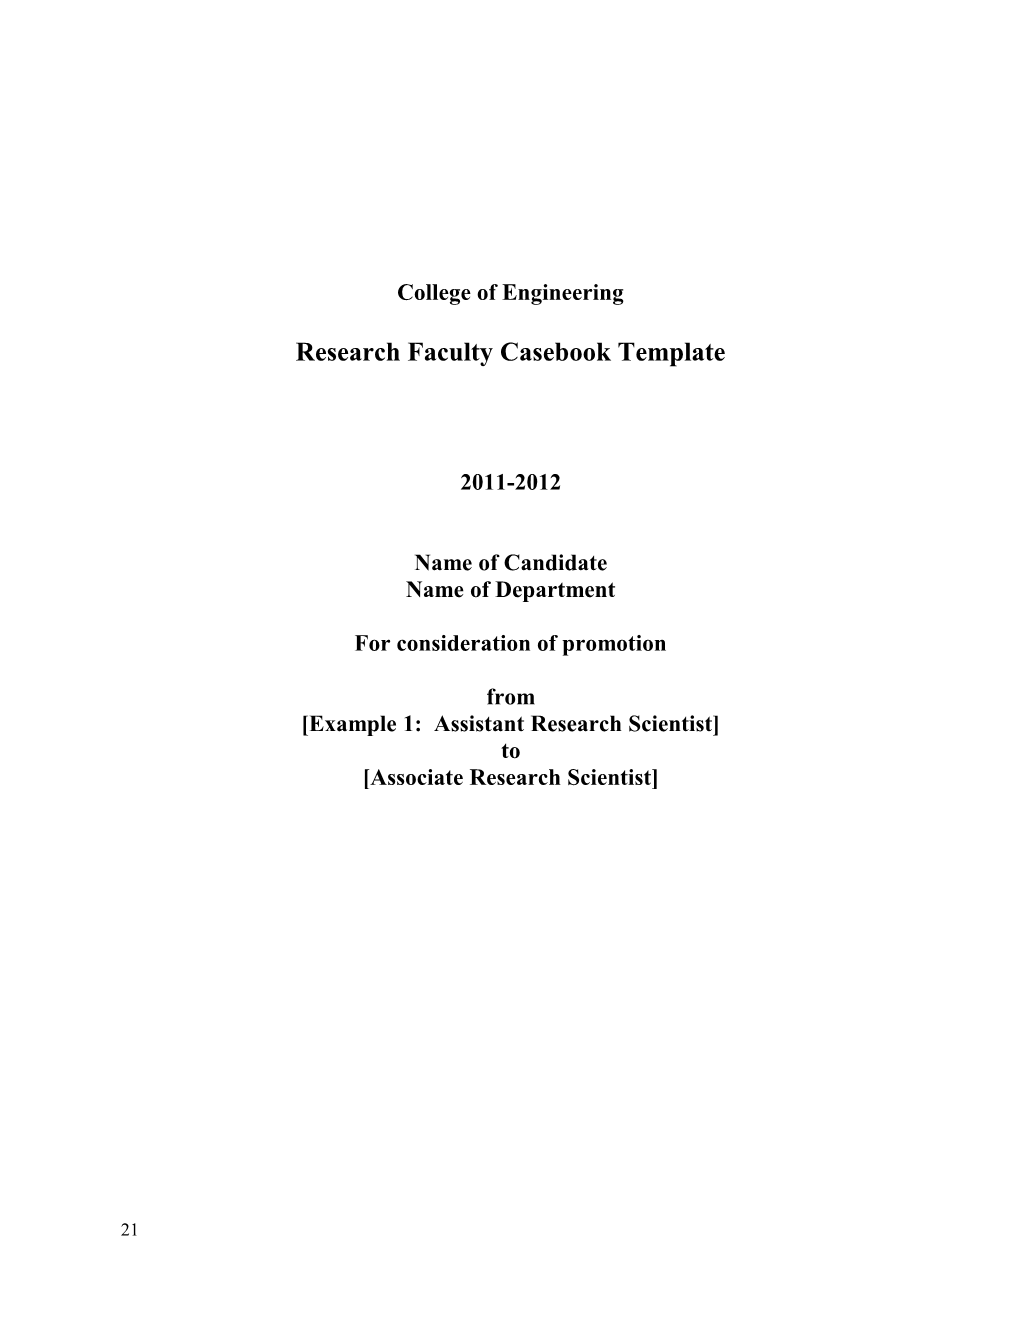 Table of Contents s438